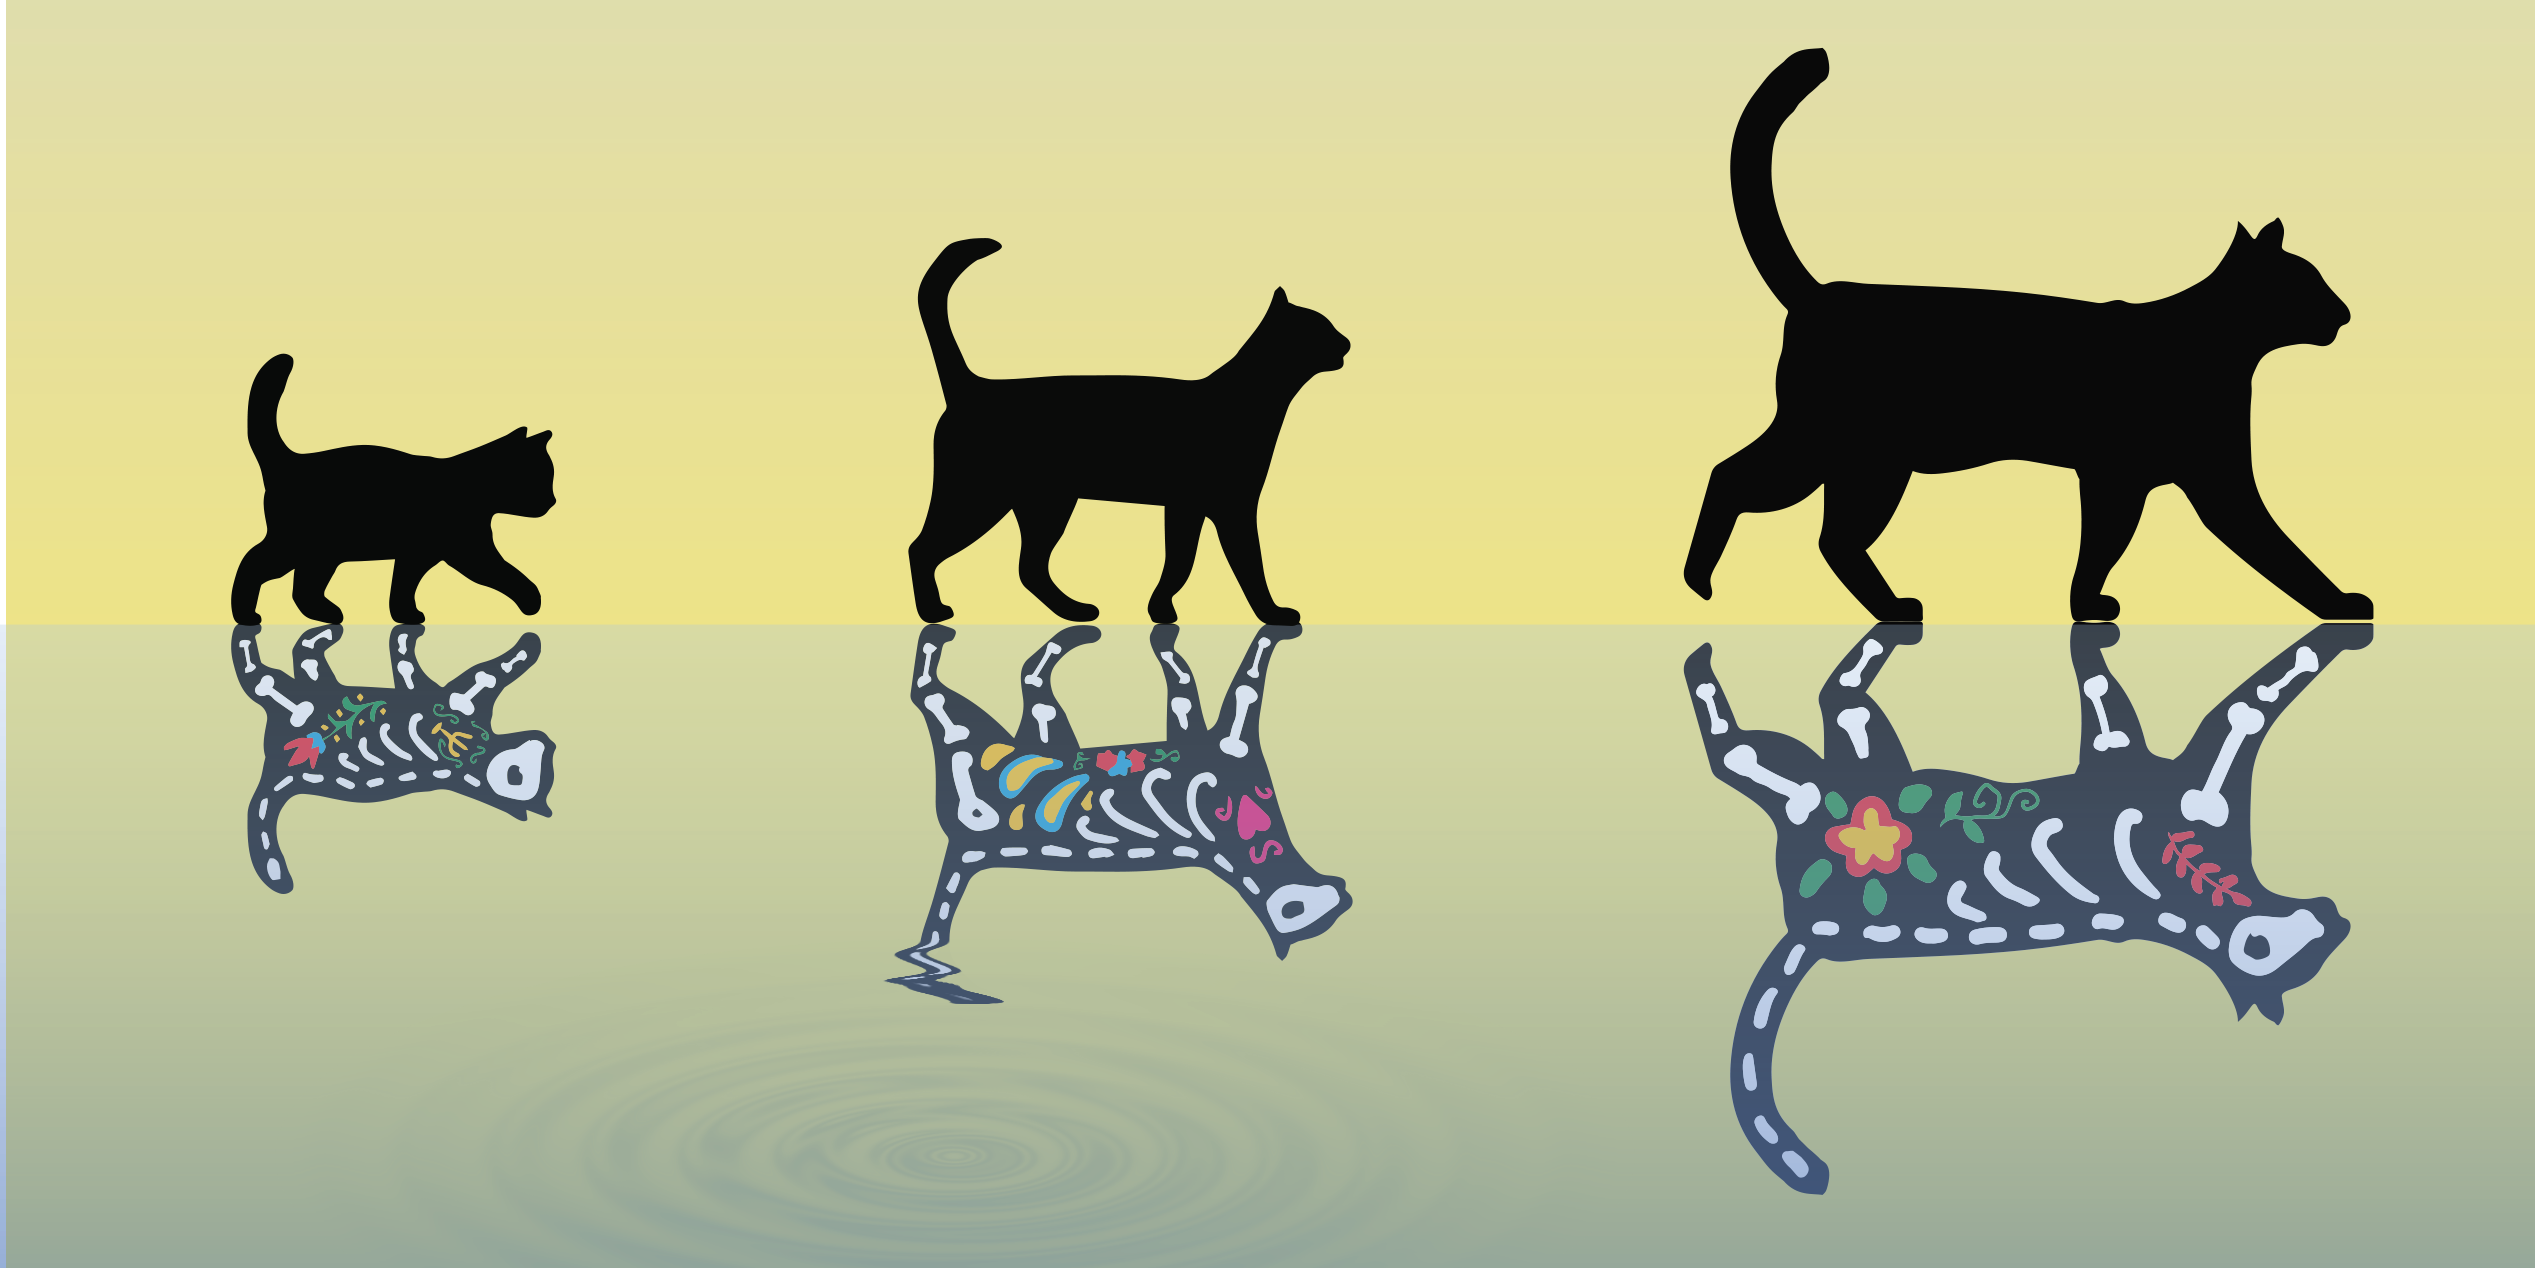 Artistic illustration of three cats and their mirror images to symbolise Schroedinger Cats